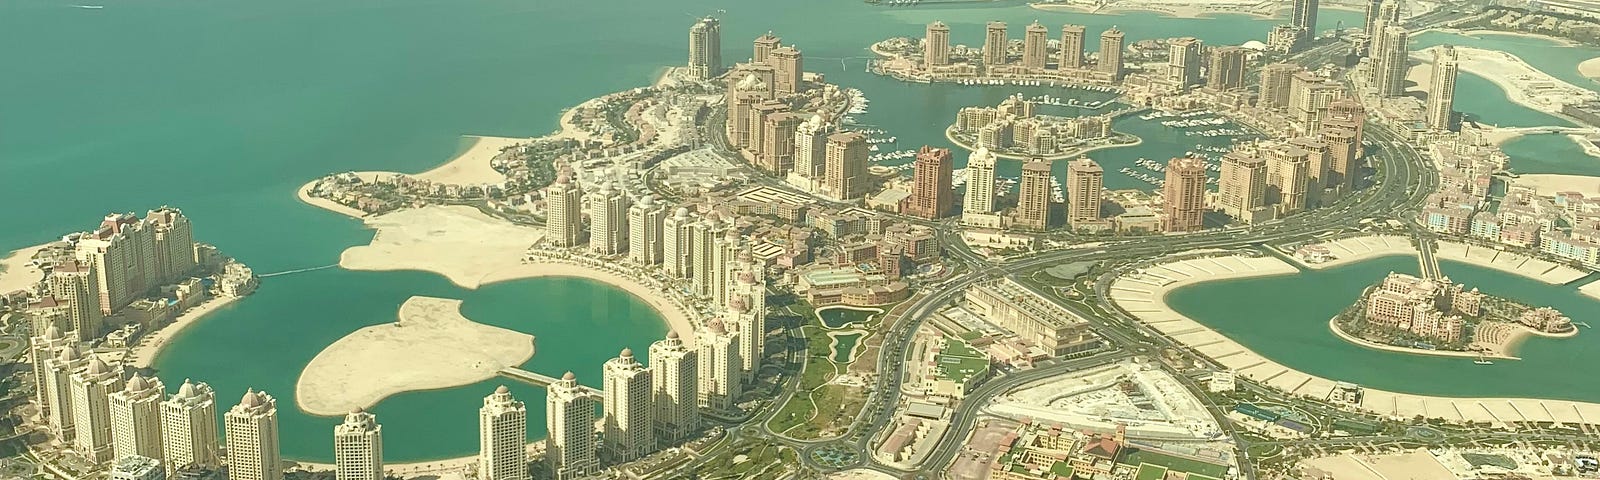 View of the city of Doha from an airplane window: the rich green water, & skyscrapers all around the island